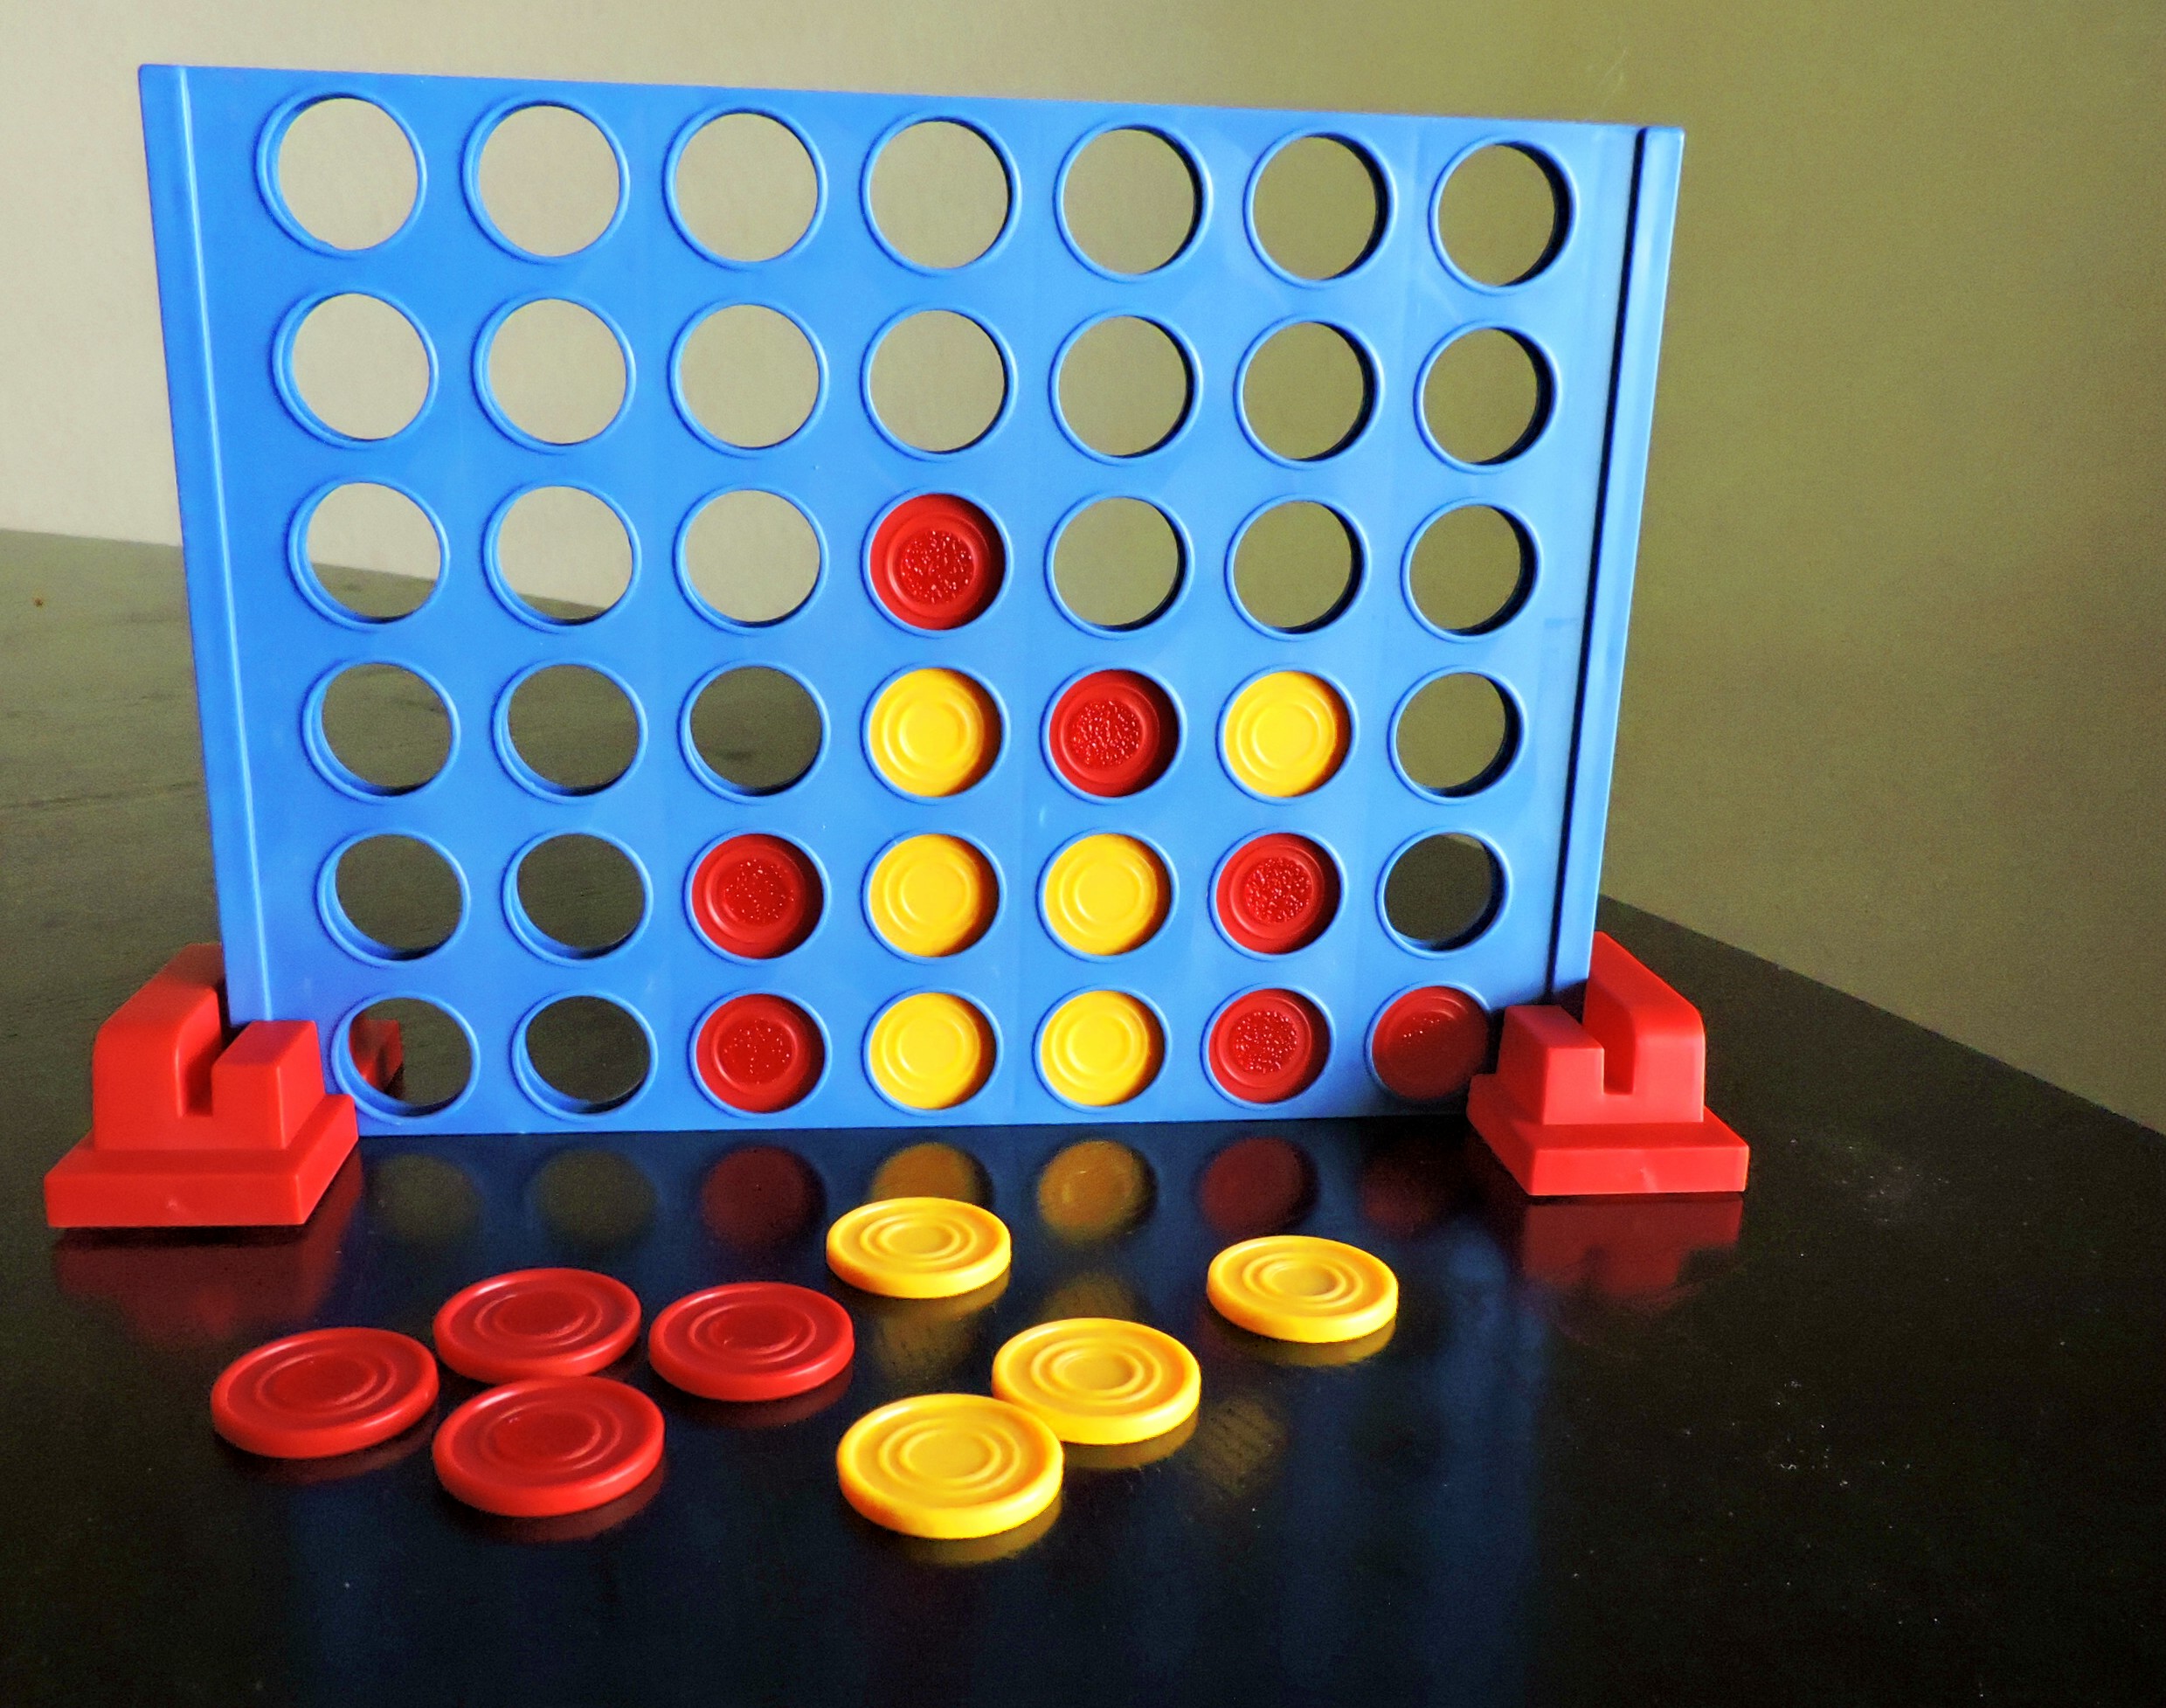 Game set up for Connect Four